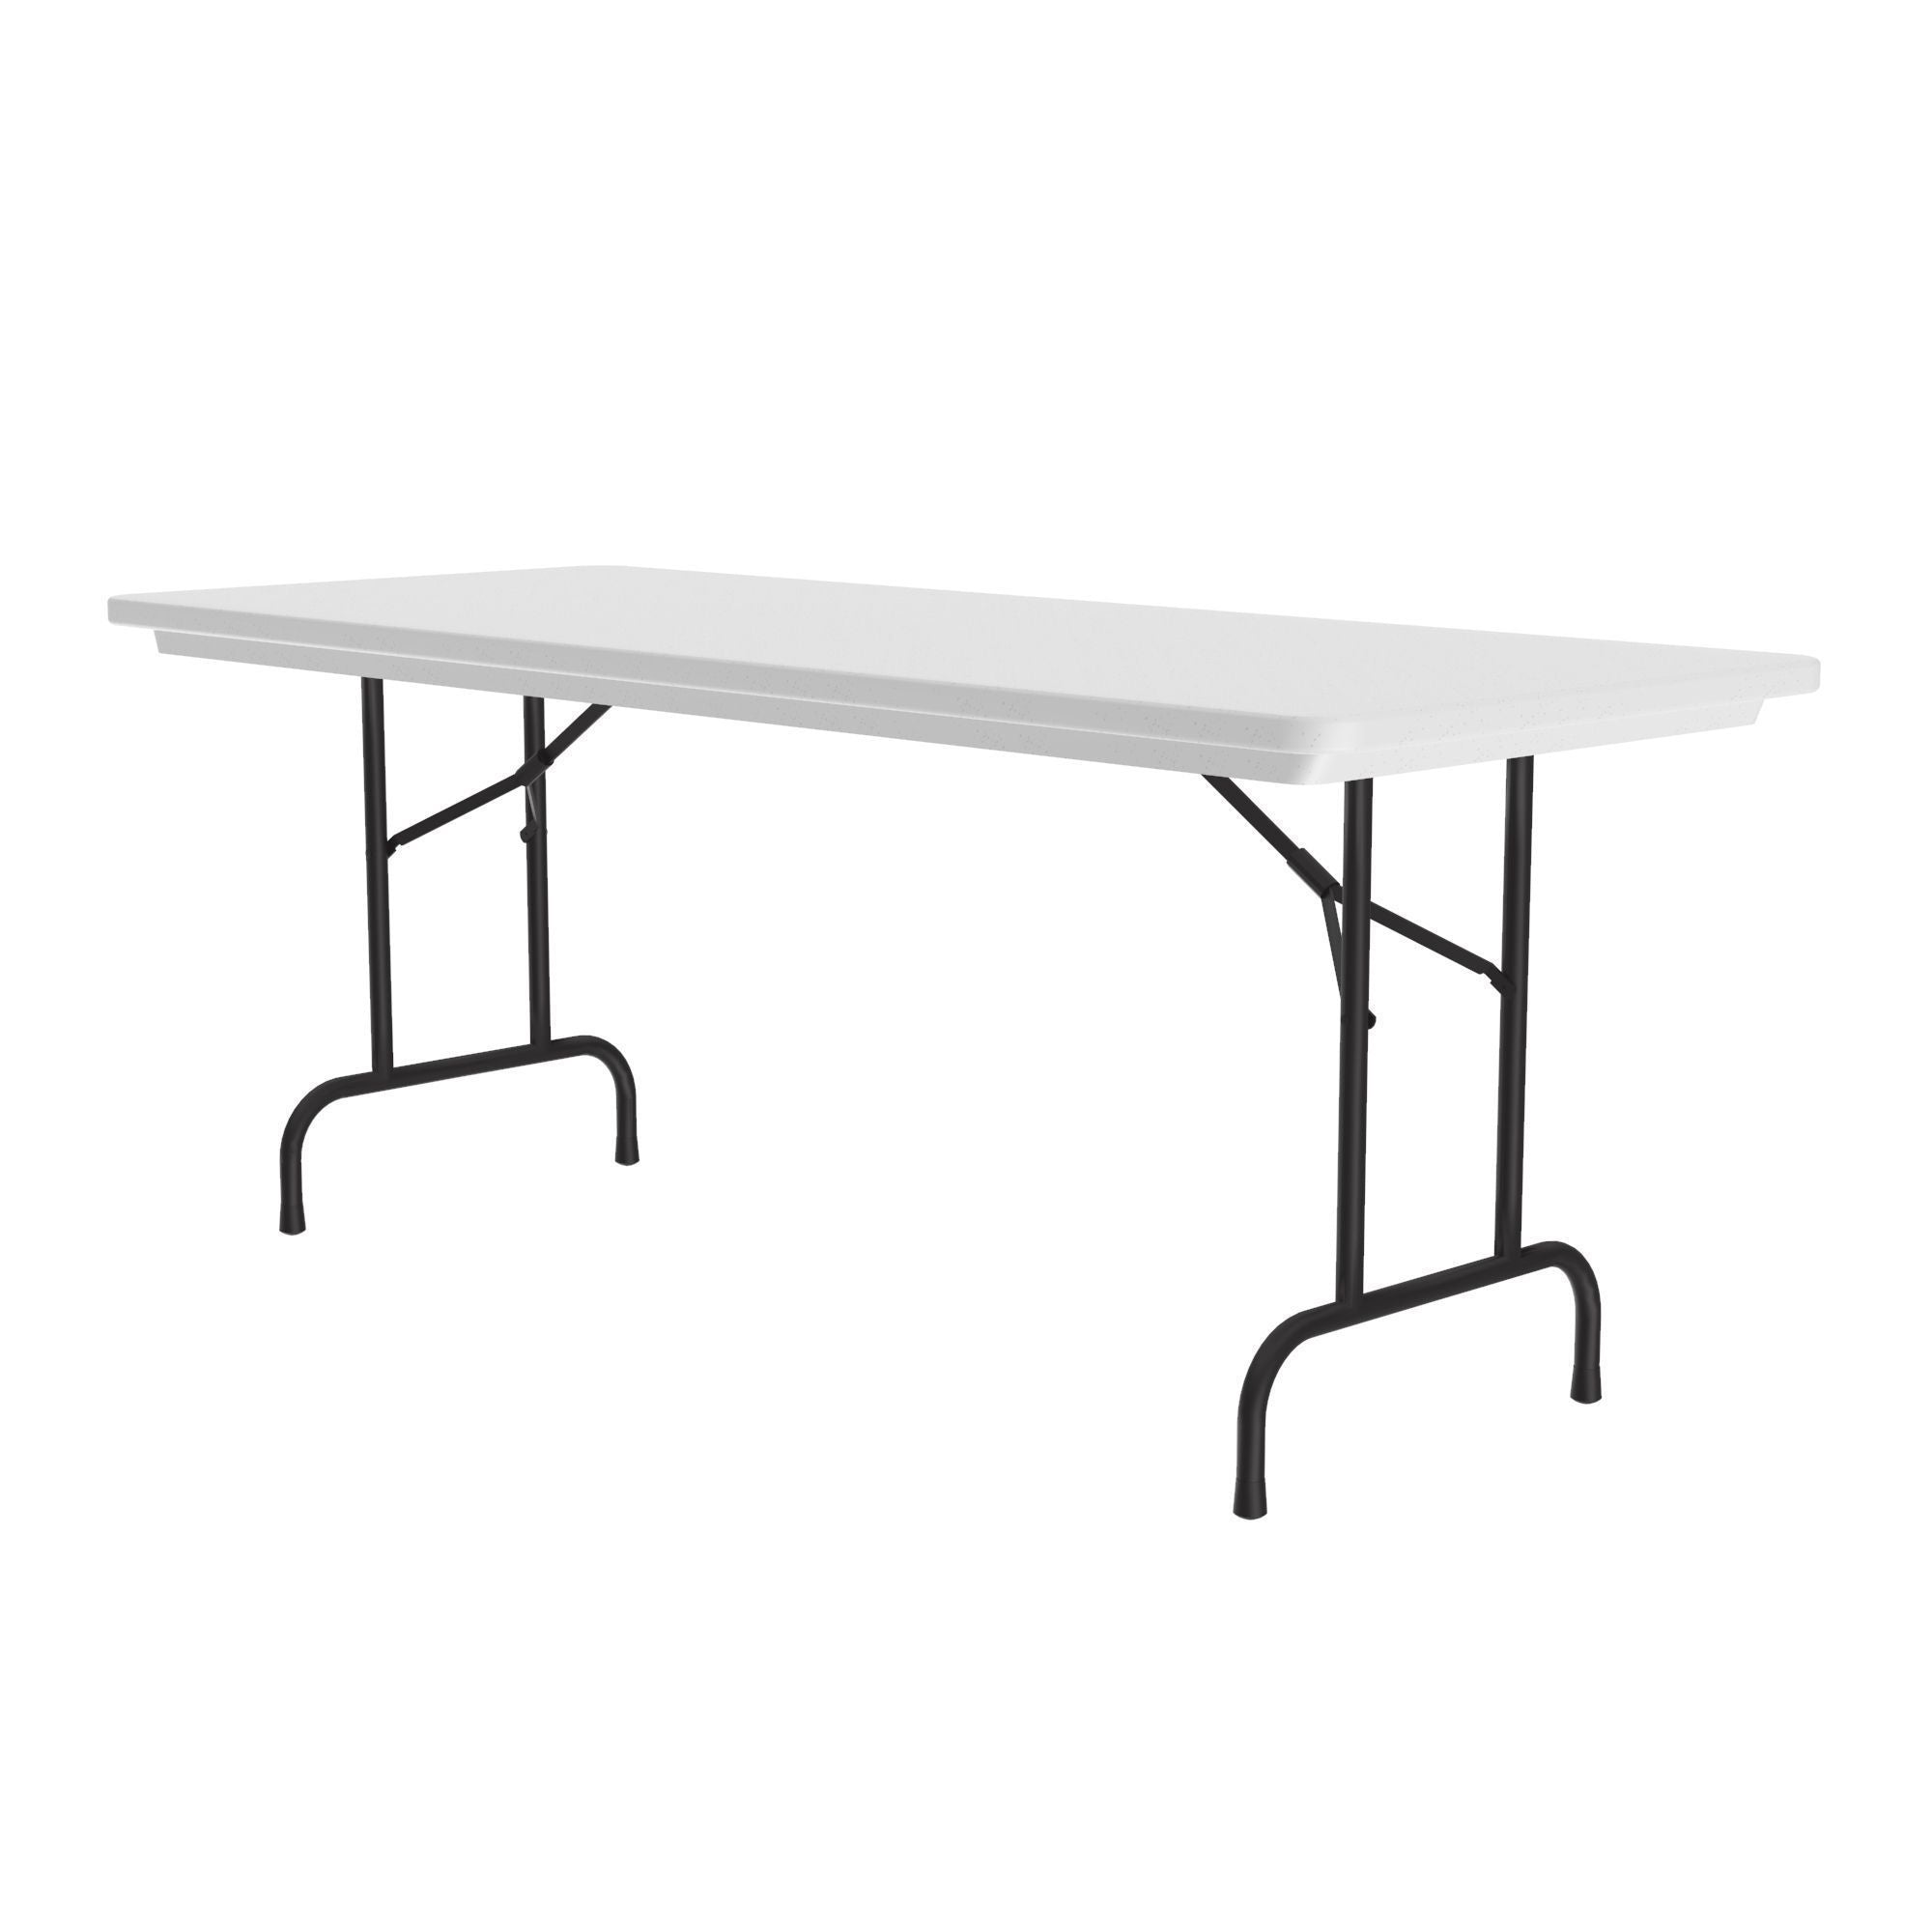 Heavy Duty Commercial Use Blow Molded Folding Table, Standard Colors, Standard 29" Fixed Height, 30 x 72